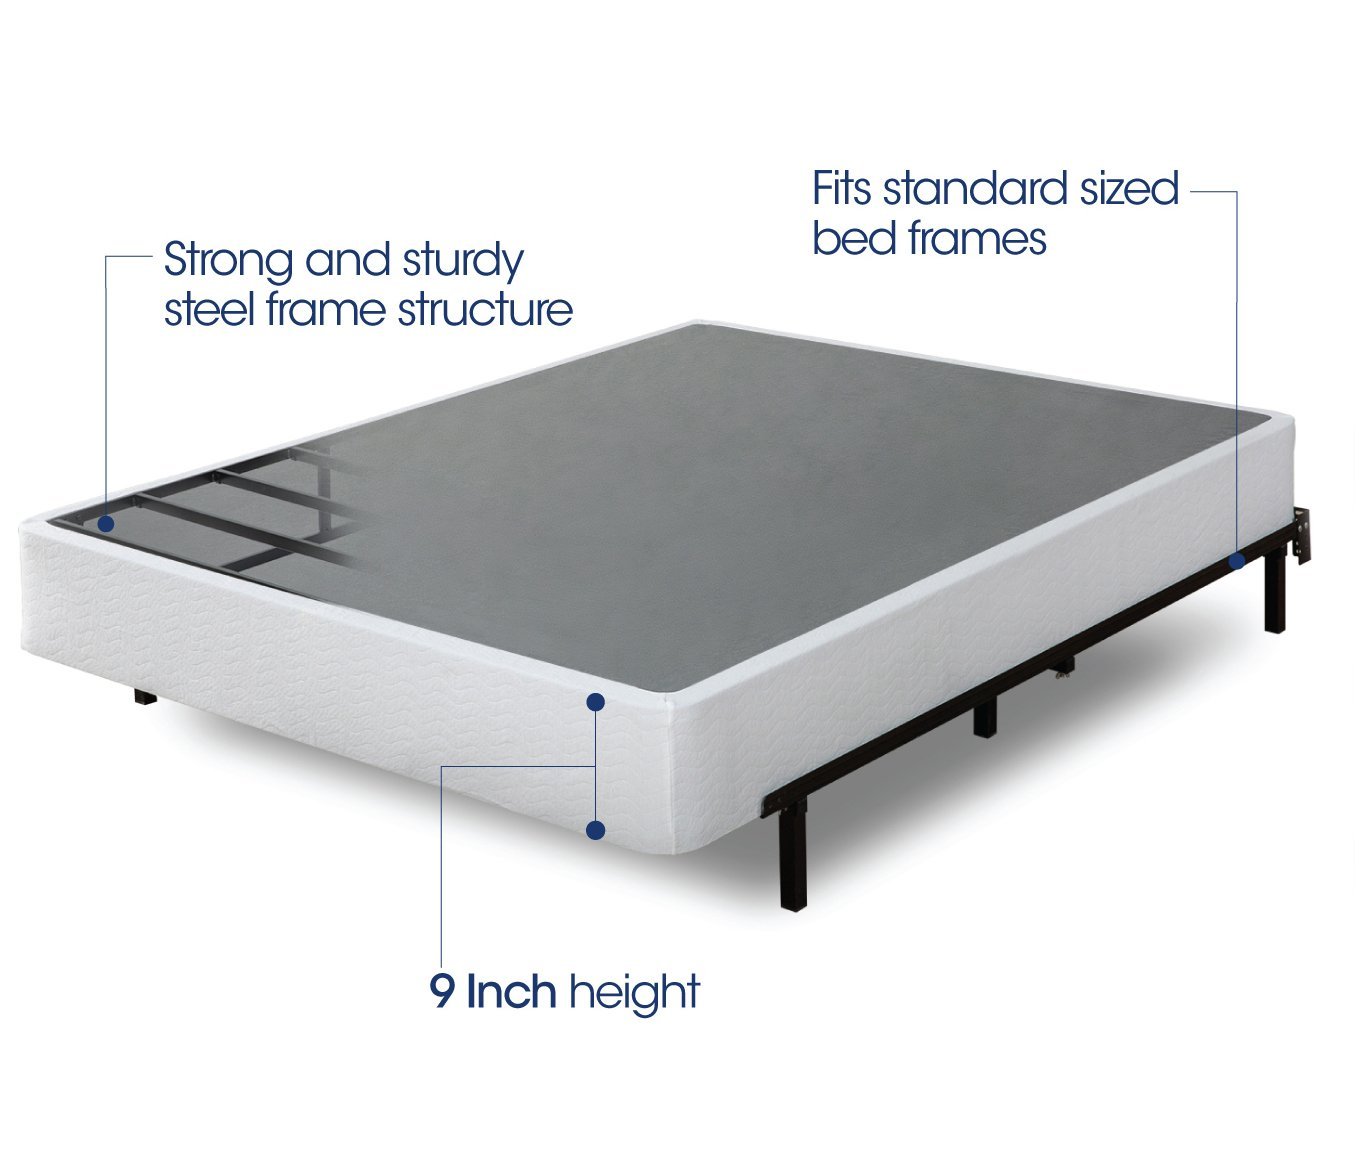 Zinus 9 Inch High Profile Smart Box Spring / Mattress Foundation / Strong Steel structure / Easy assembly required, King